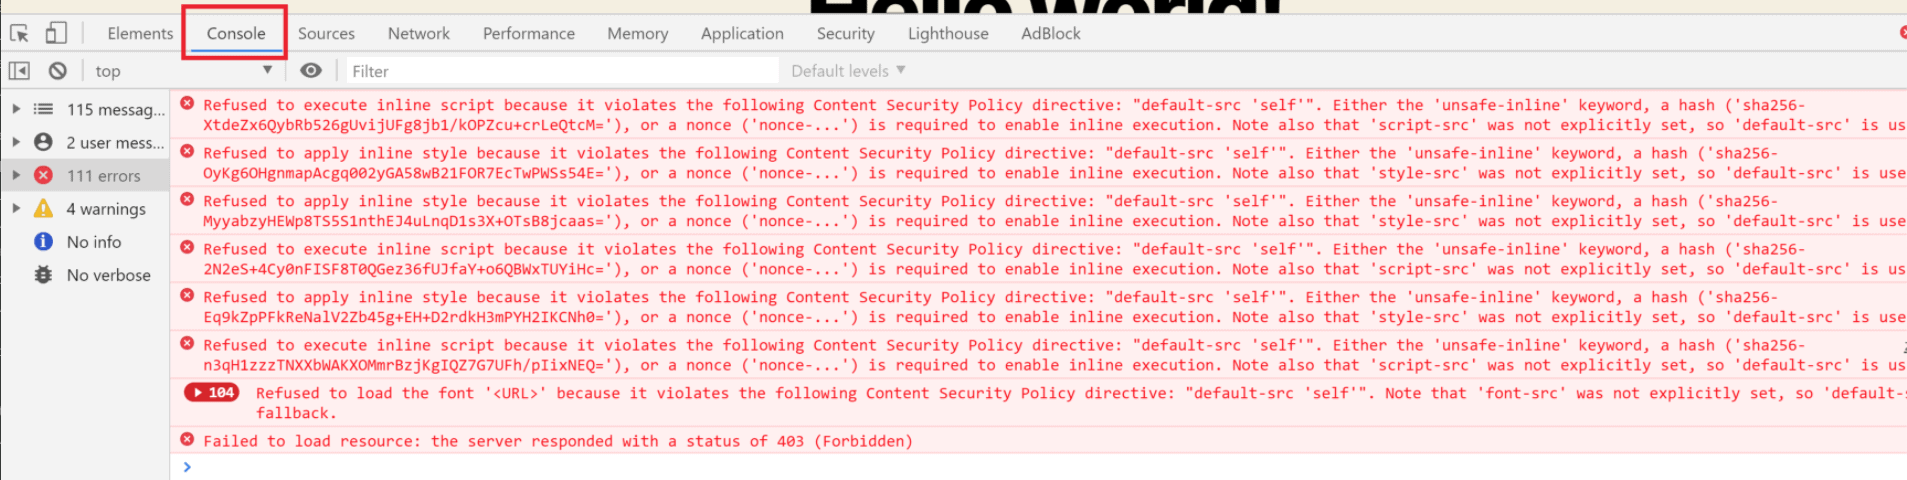 Content Security Policy error log